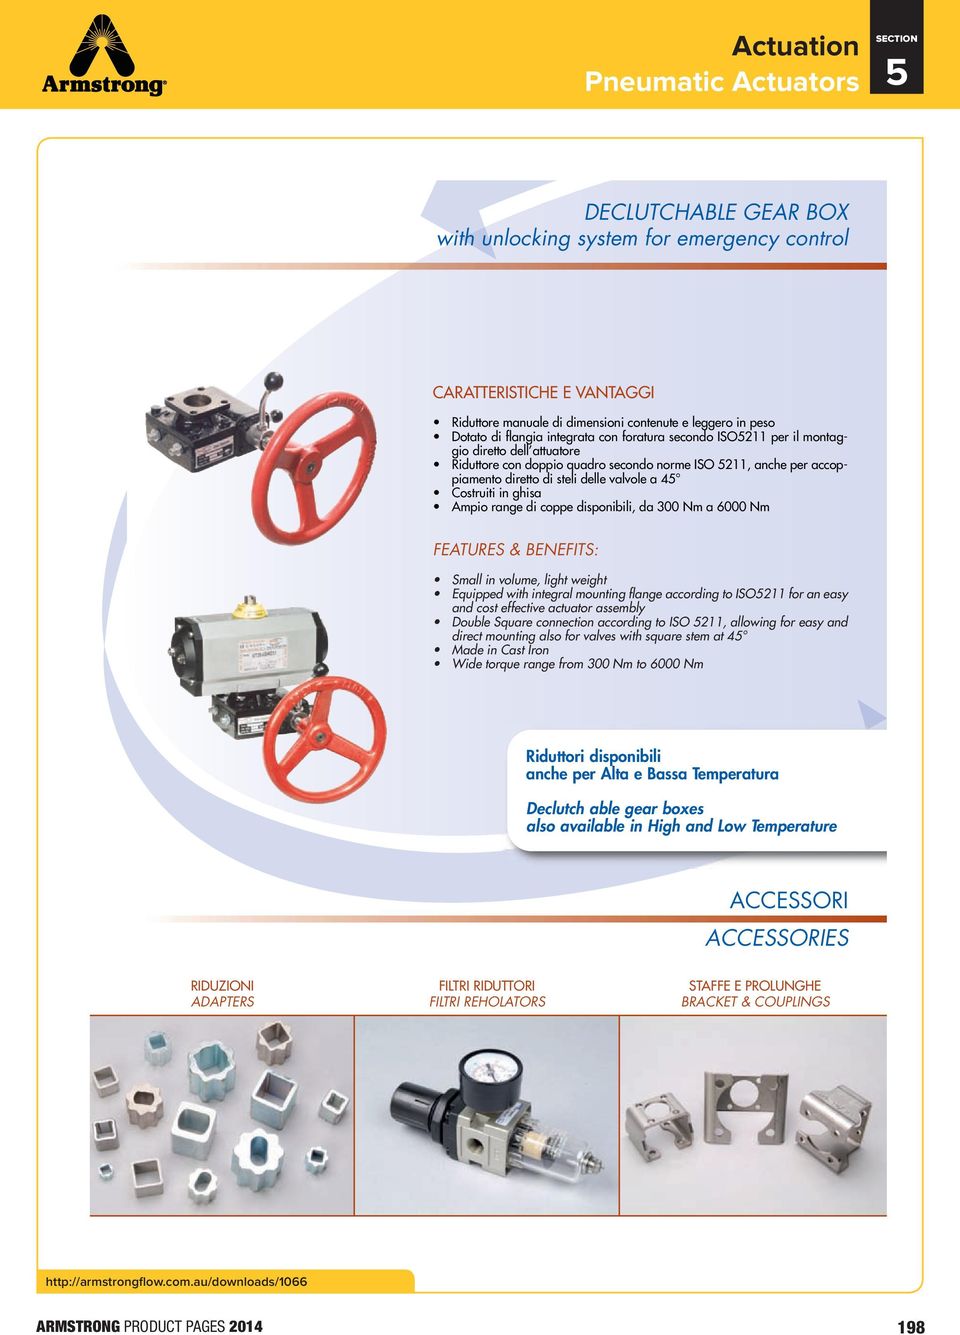 coppe disponibili, da 300 Nm a 6000 Nm FEATURES & BENEFITS: Small in volume, light weight Equipped with integral mounting flange according to ISO211 for an easy and cost effective actuator assembly